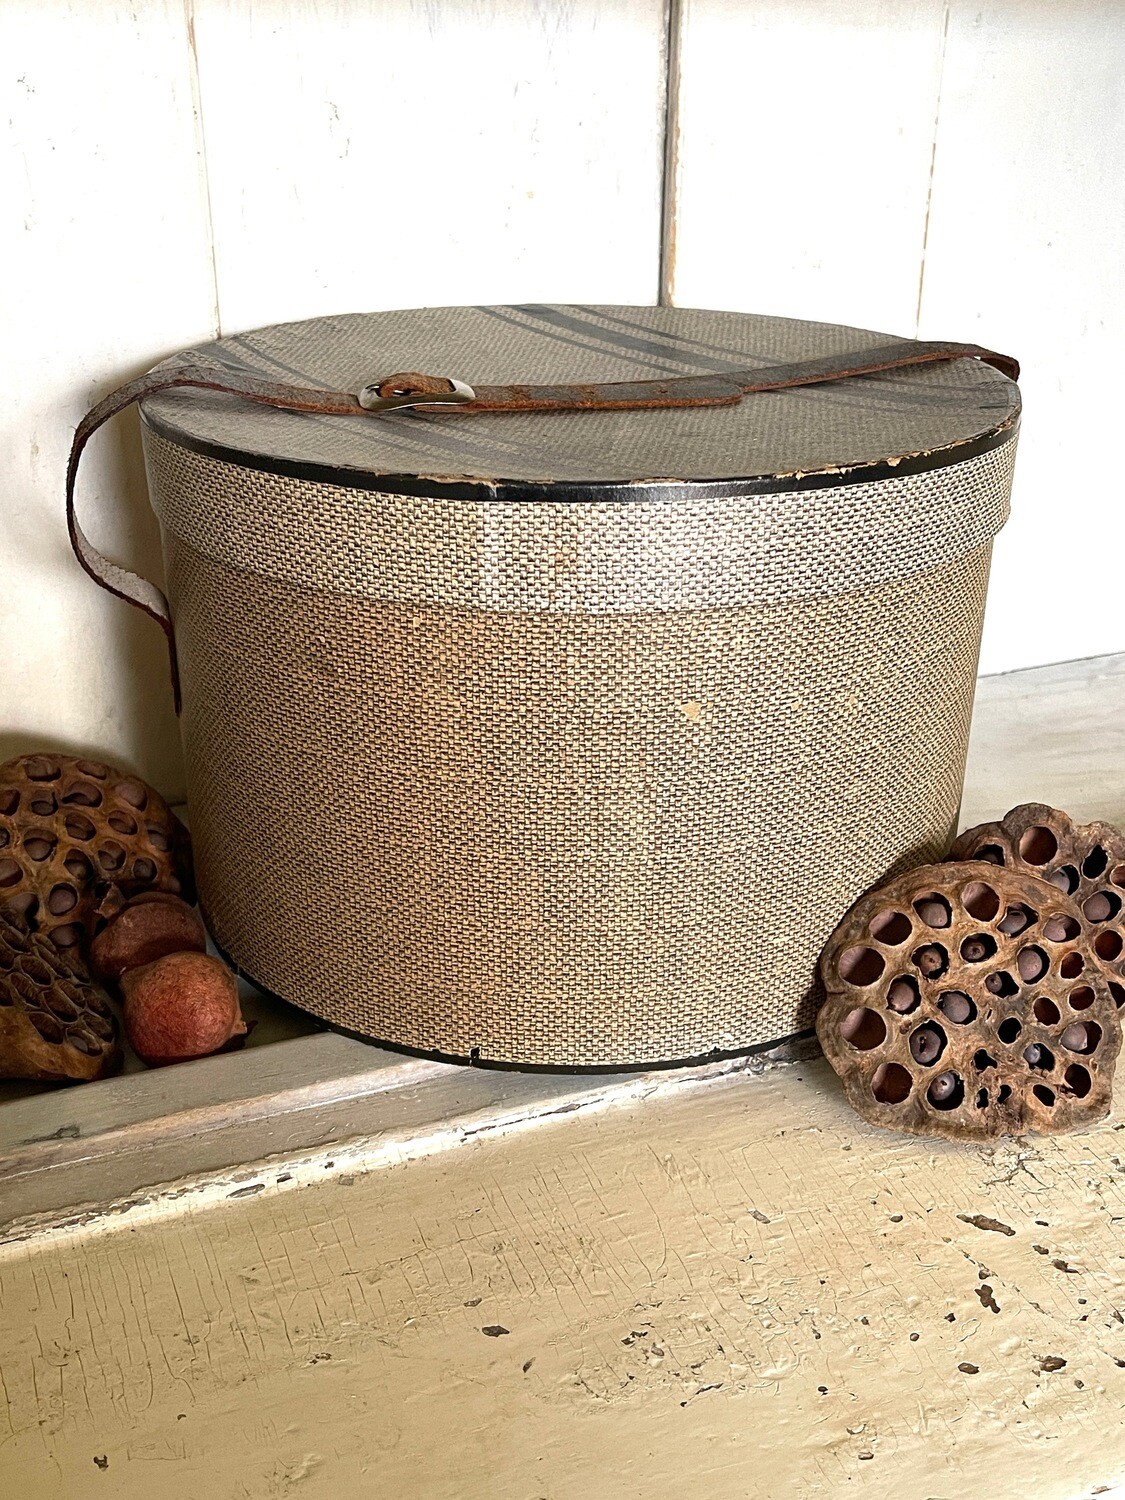 Vintage Hat Box with Rare Leather Trim